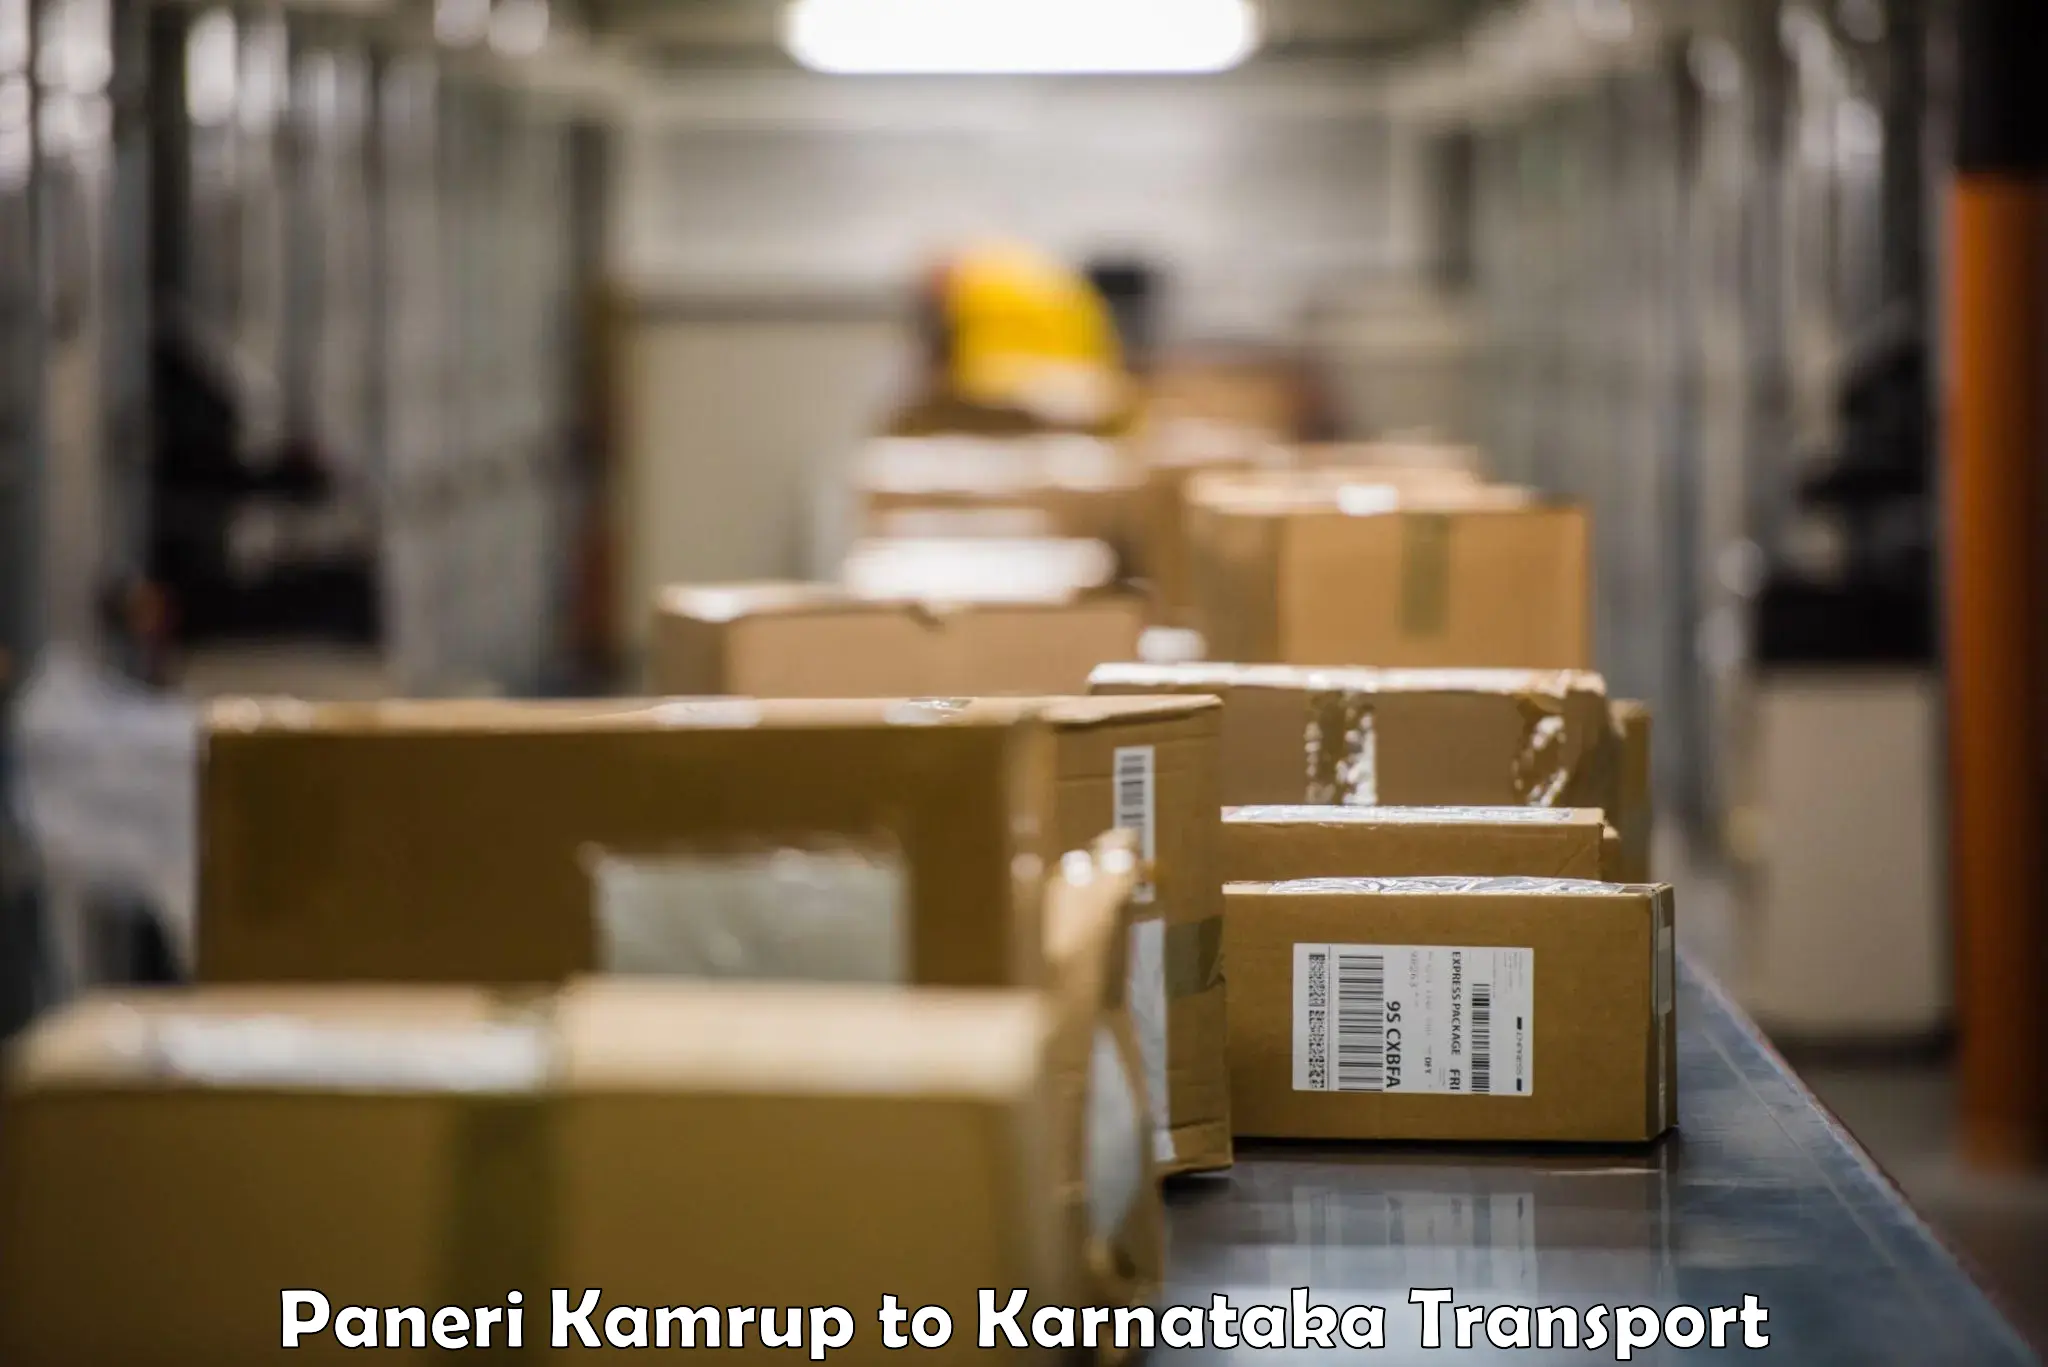 Truck transport companies in India Paneri Kamrup to Manipal Academy of Higher Education